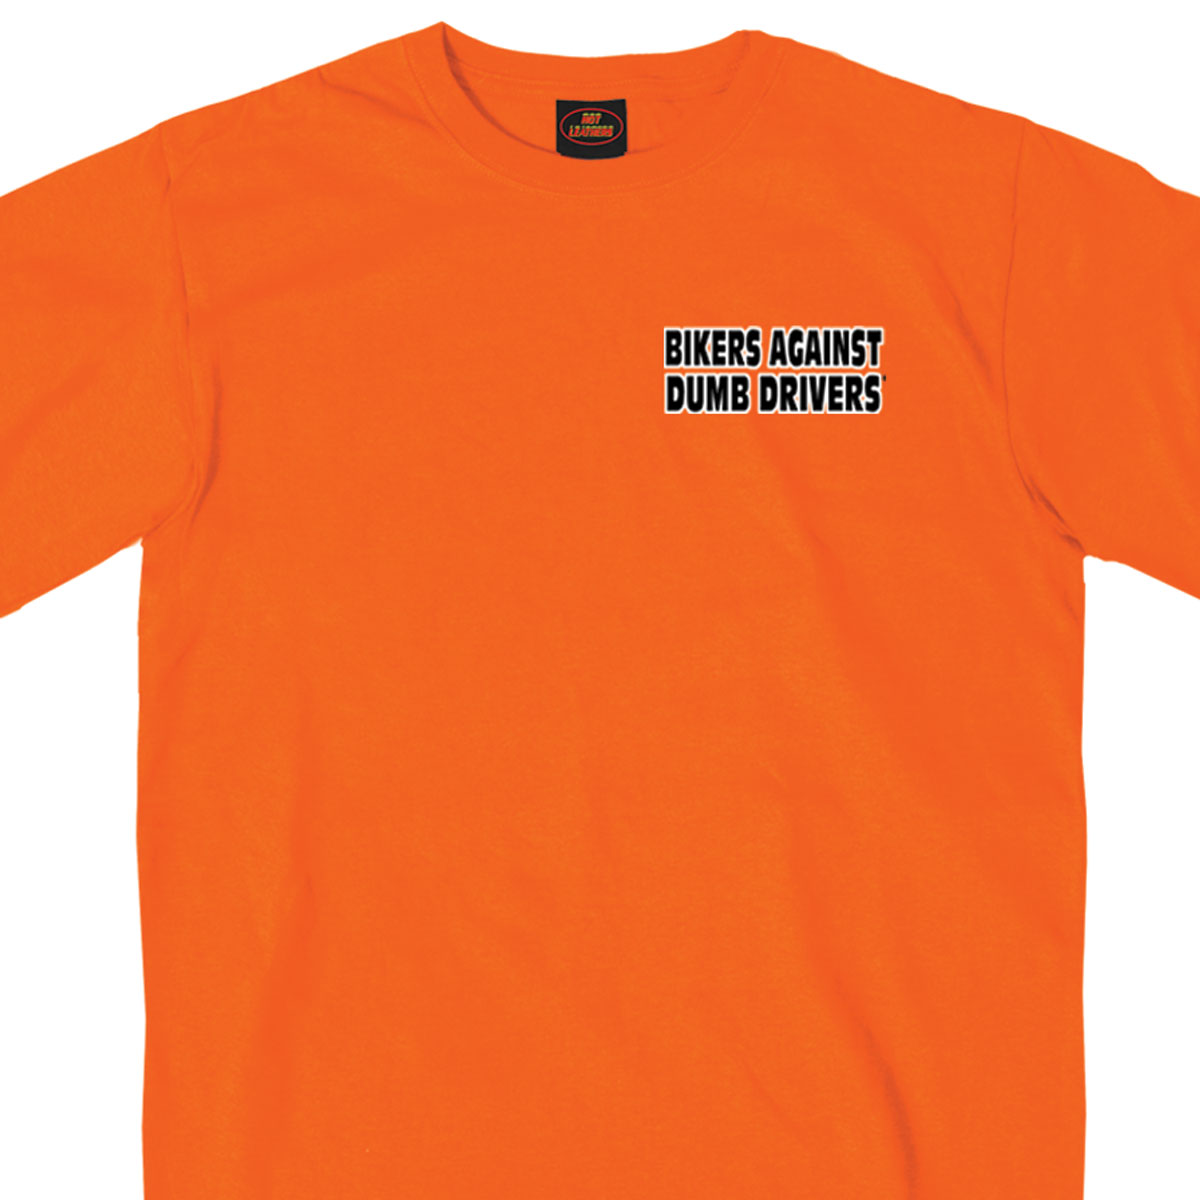 Hot Leathers GMD1090 Mens 'Can You See Me Now A***' Safety Orange T-Shirt